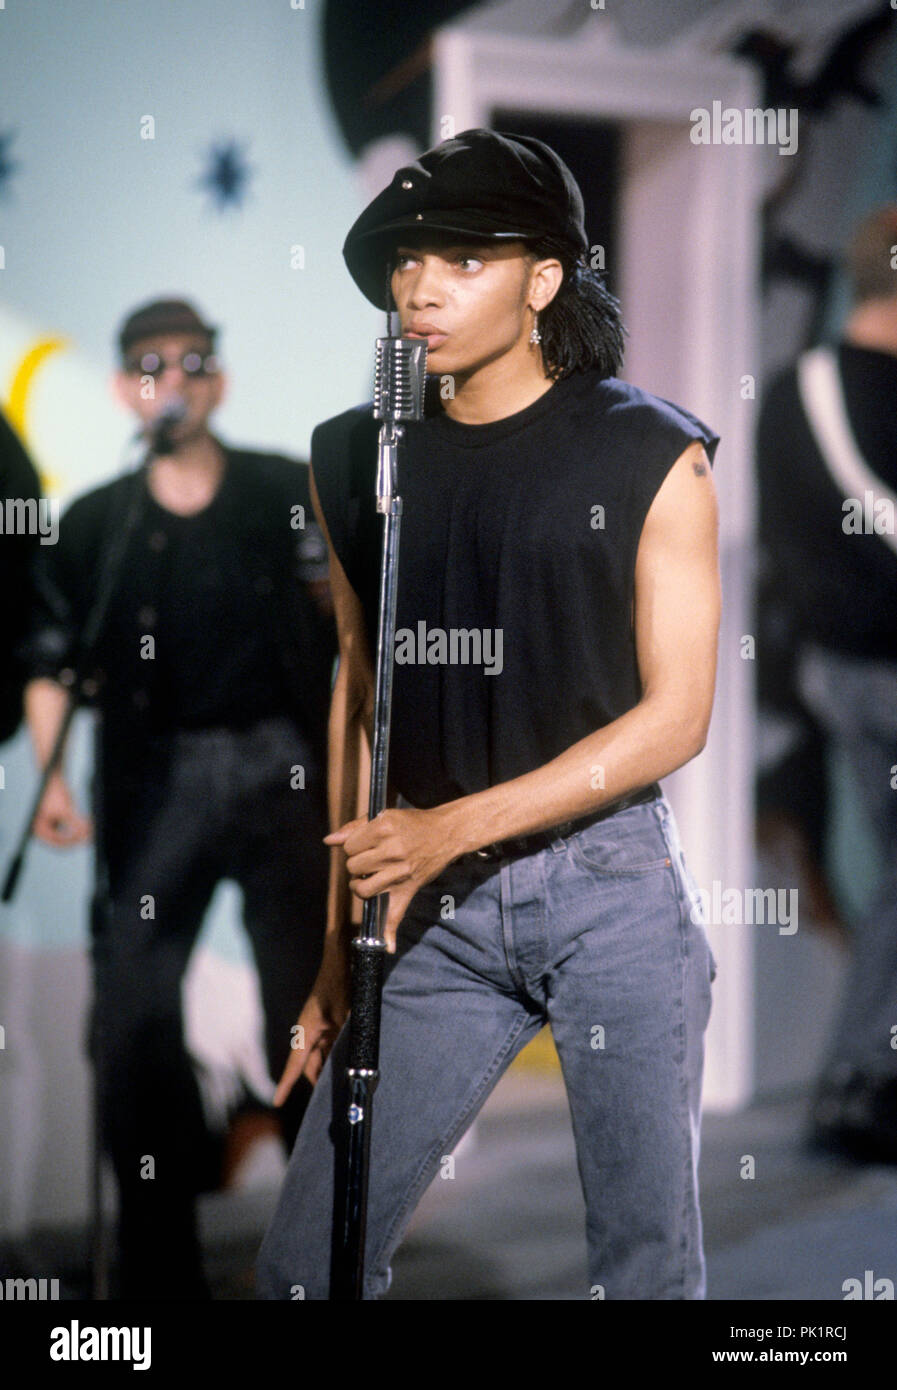 Terence Trent D Arby On 10 09 1987 In Munchen Munich Usage Worldwide Stock Photo Alamy